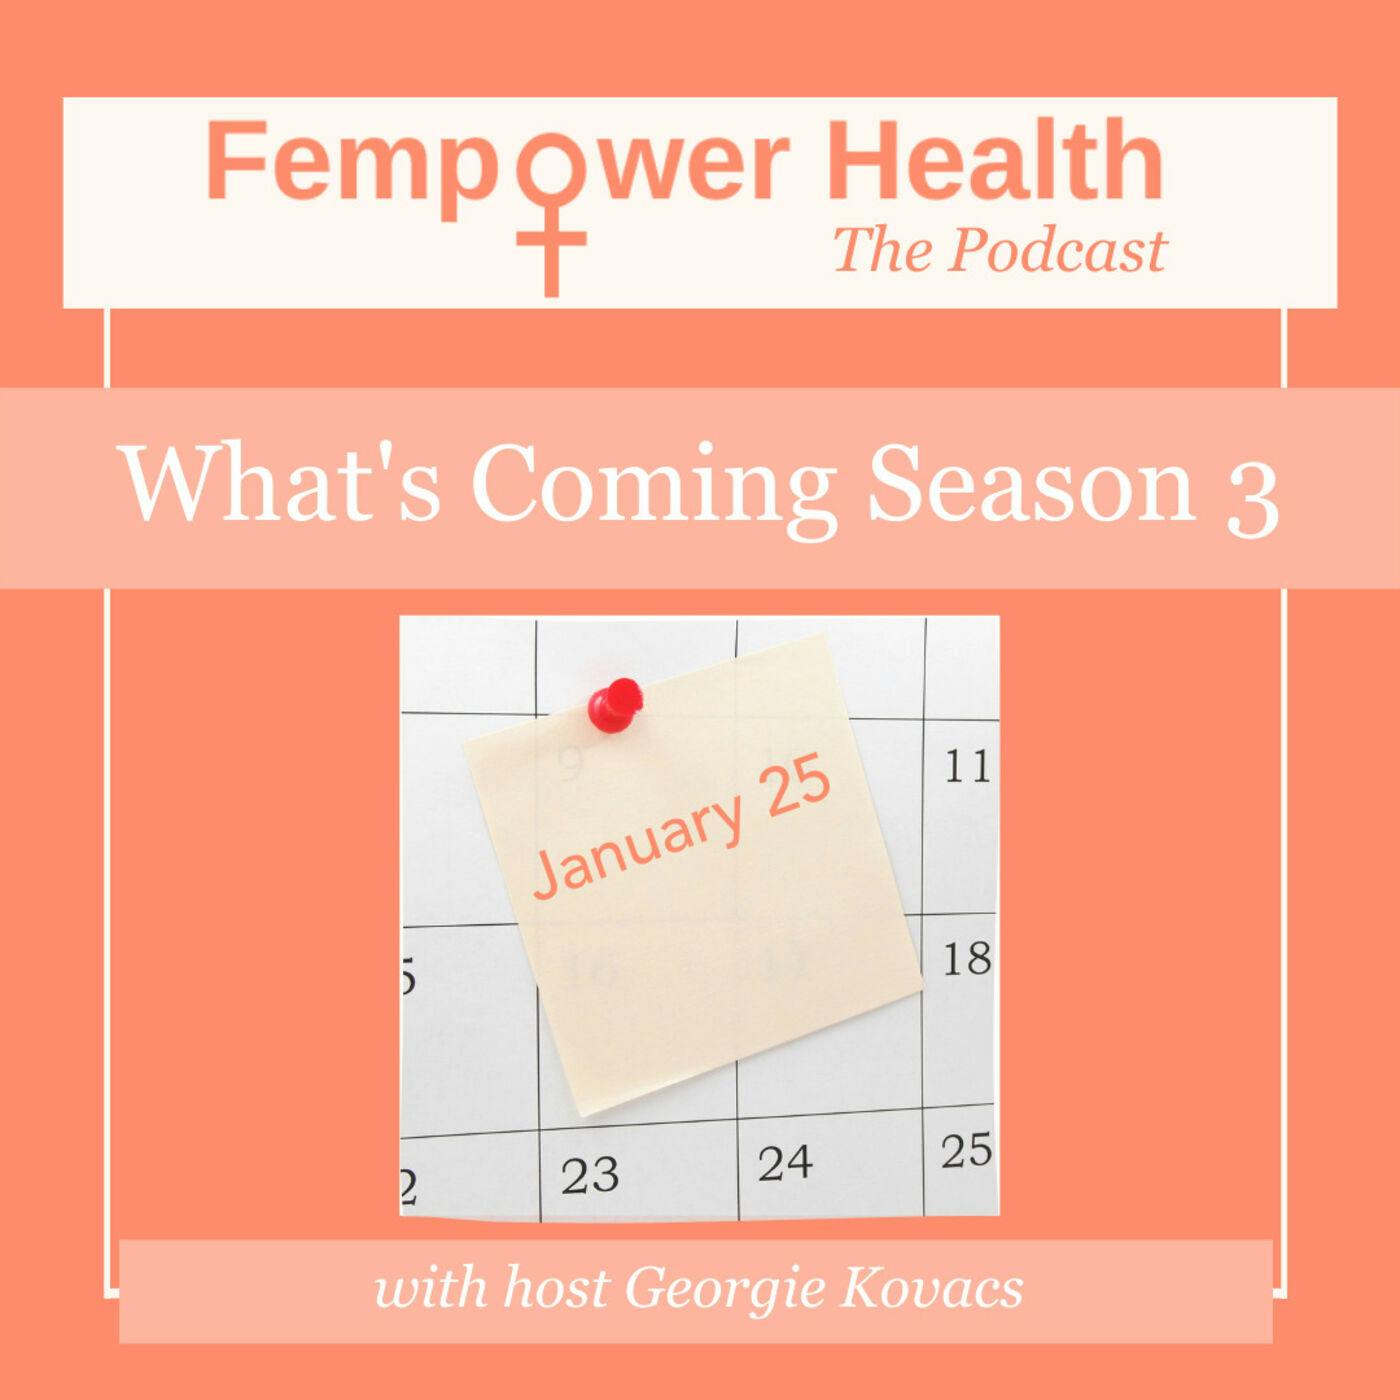 What's Coming Season 3 on Fempower Health